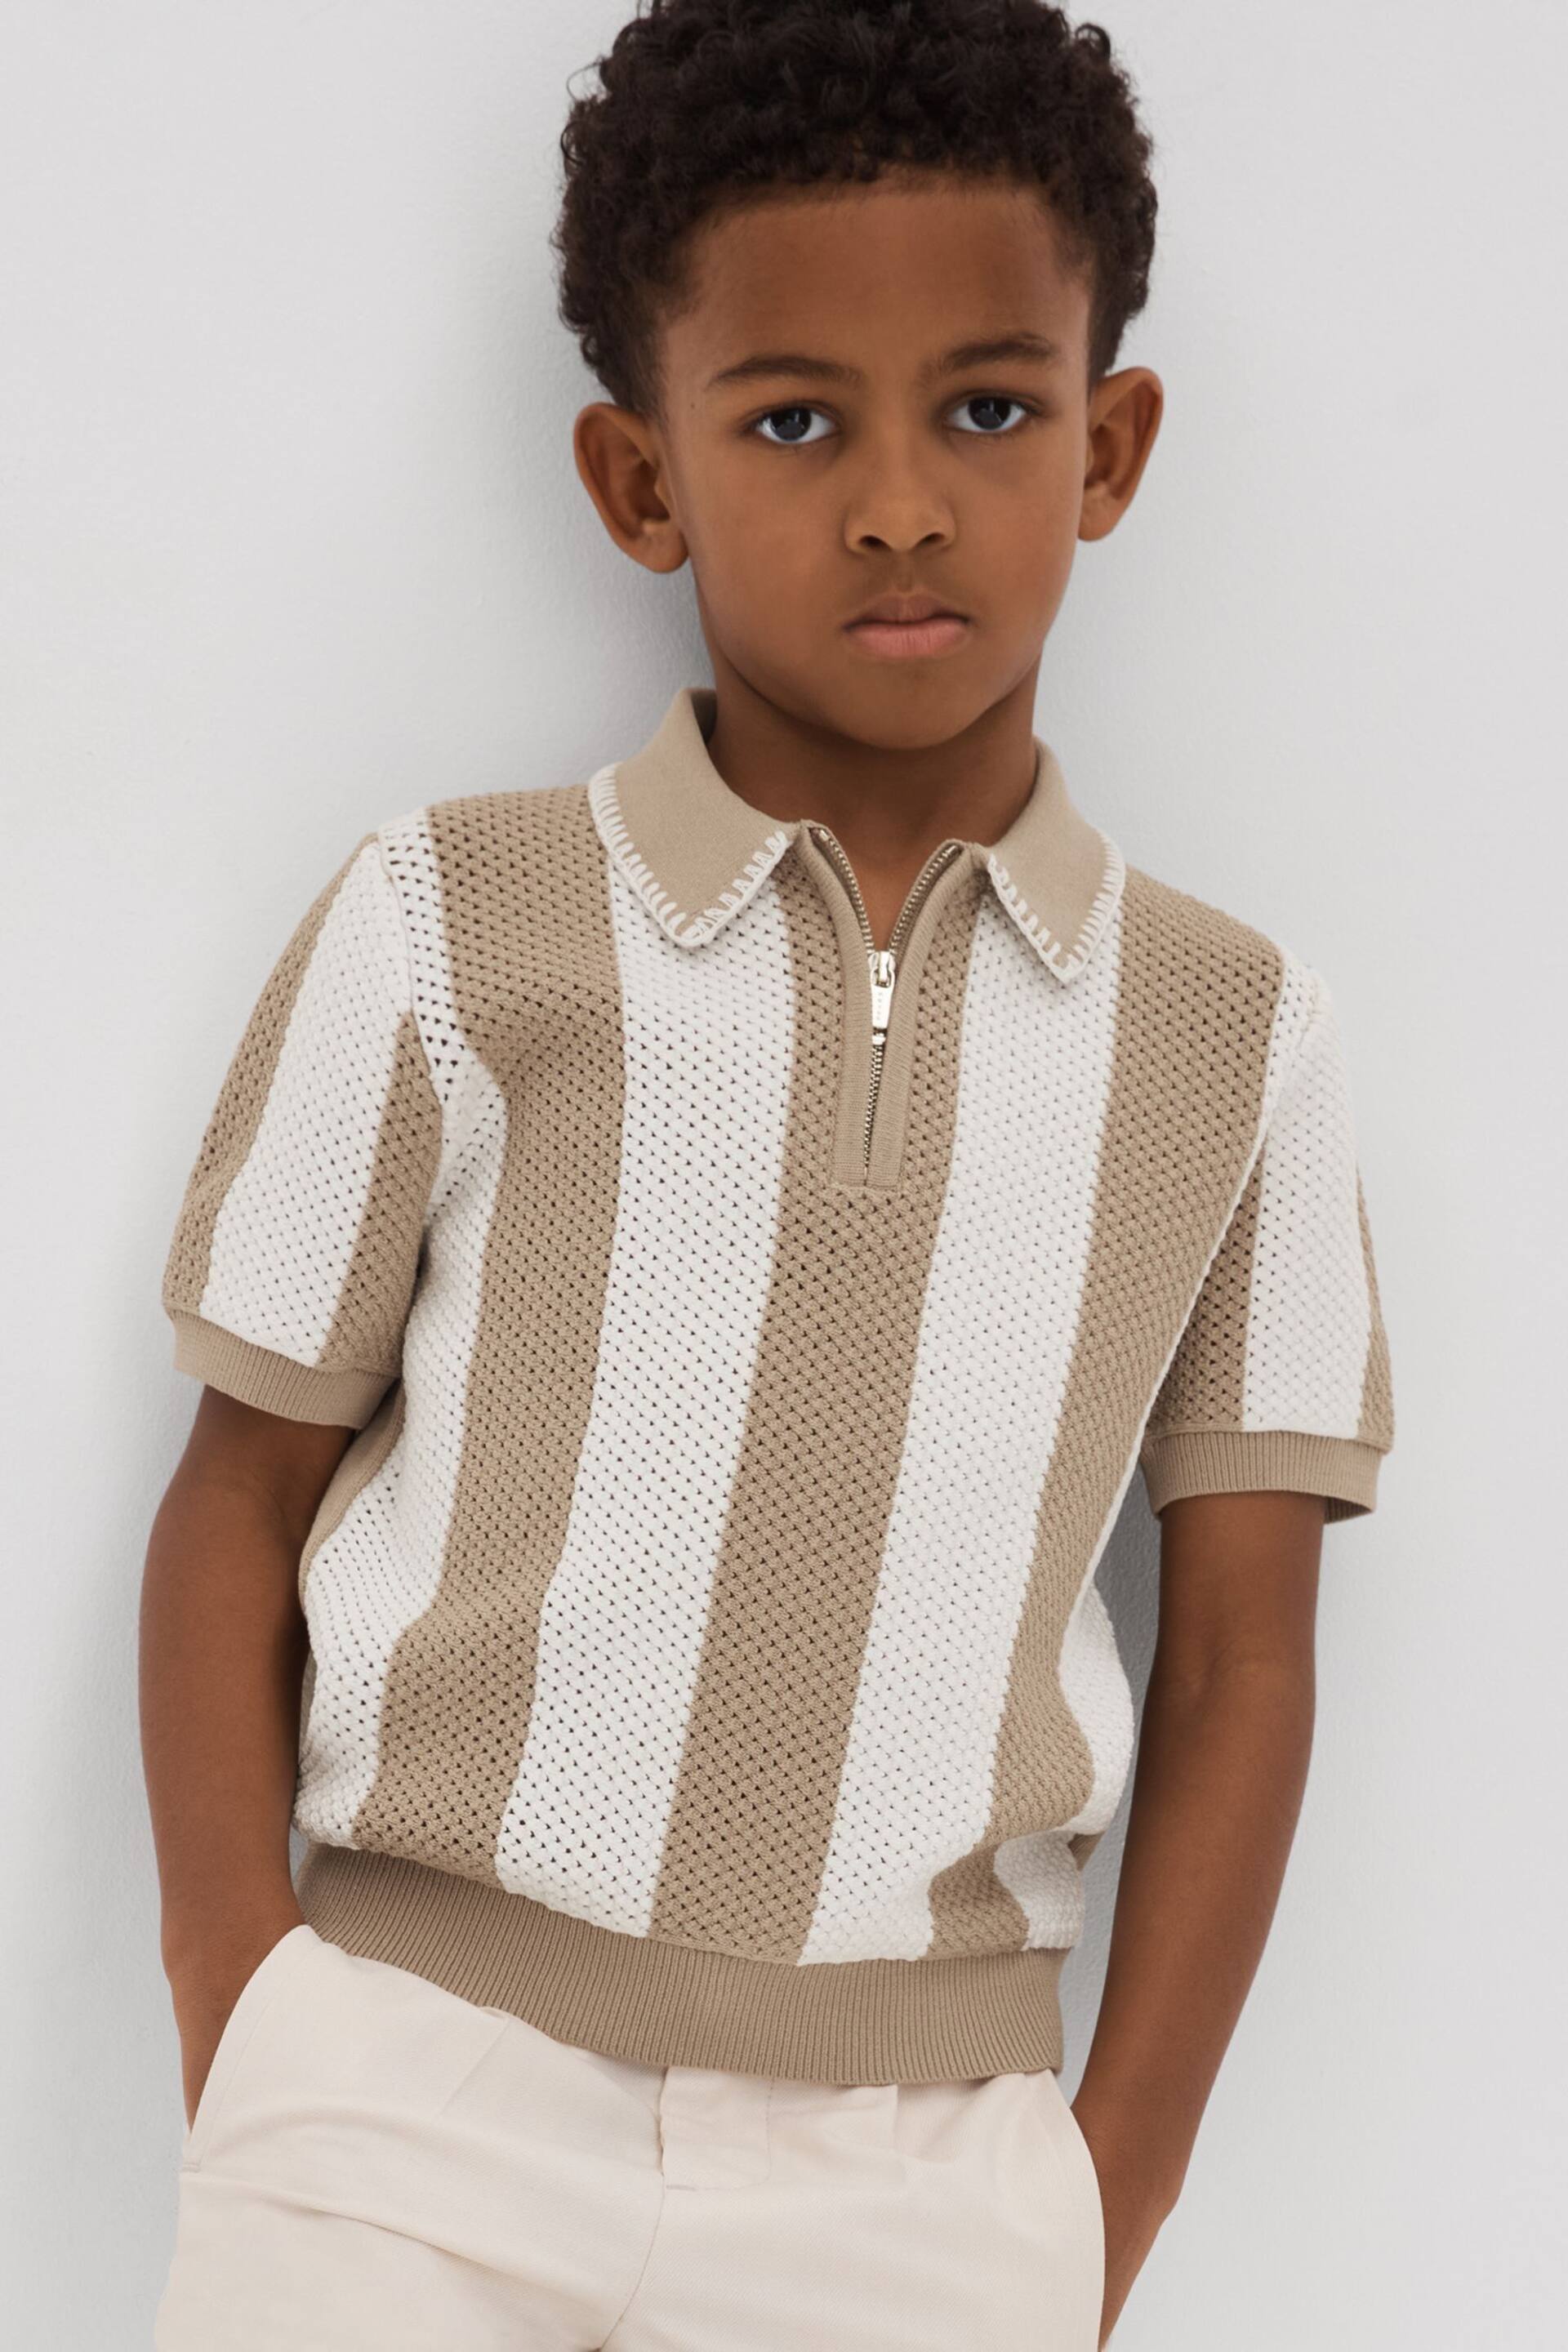 Reiss Brown Paros Knitted Striped Half Zip Polo Shirt - Image 1 of 4